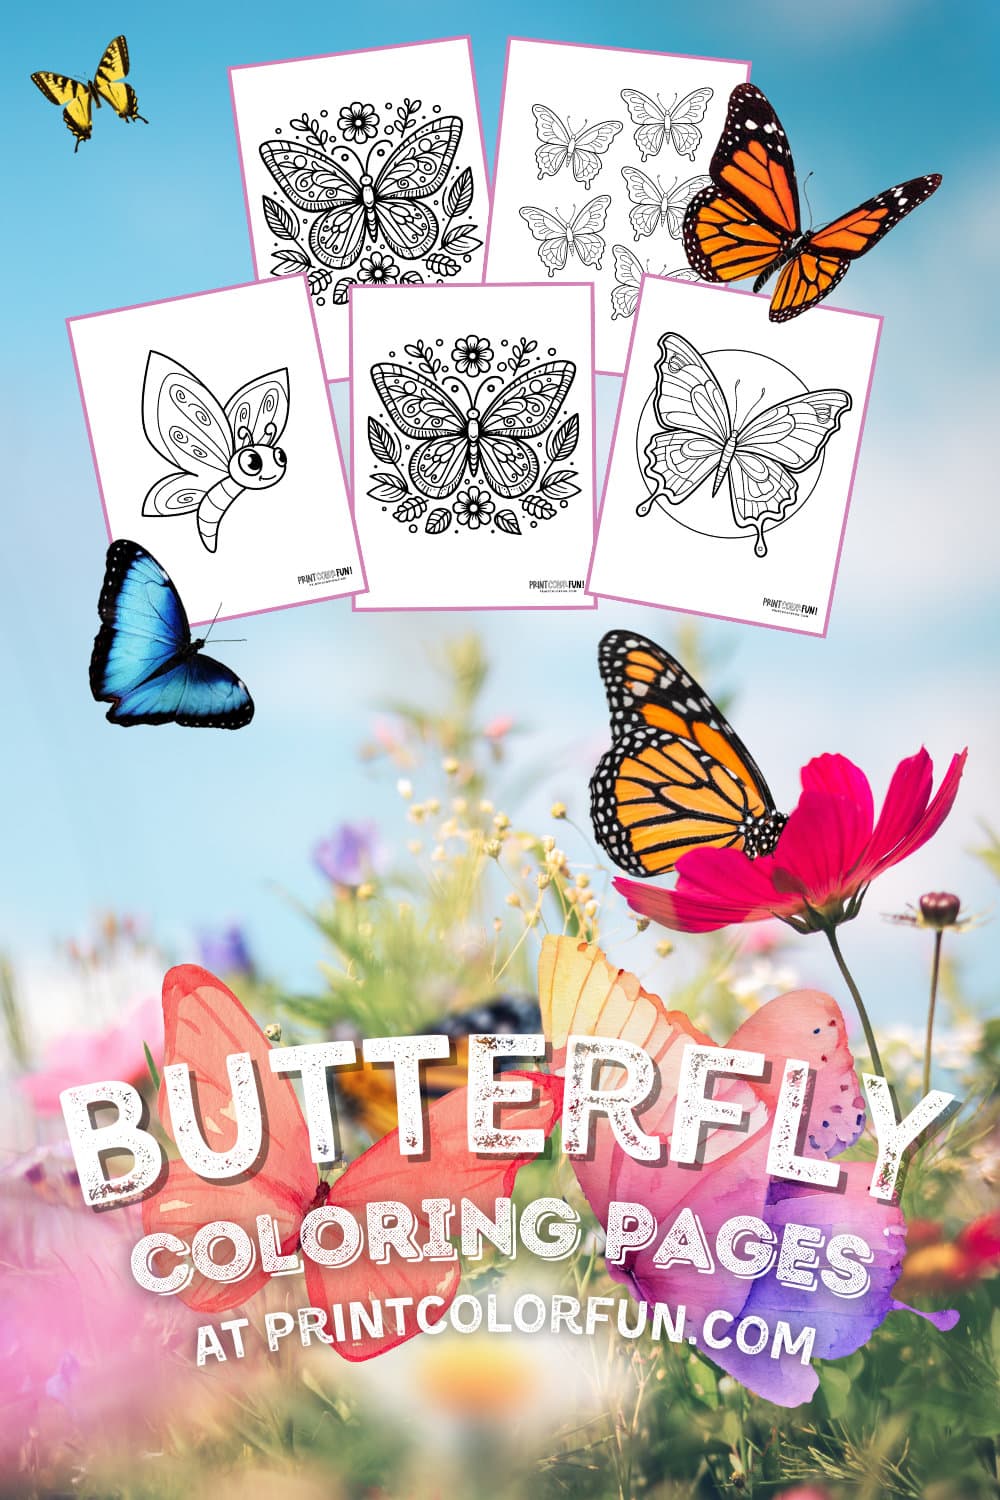 Butterfly coloring pages and animal clipart - PrintColorFun com